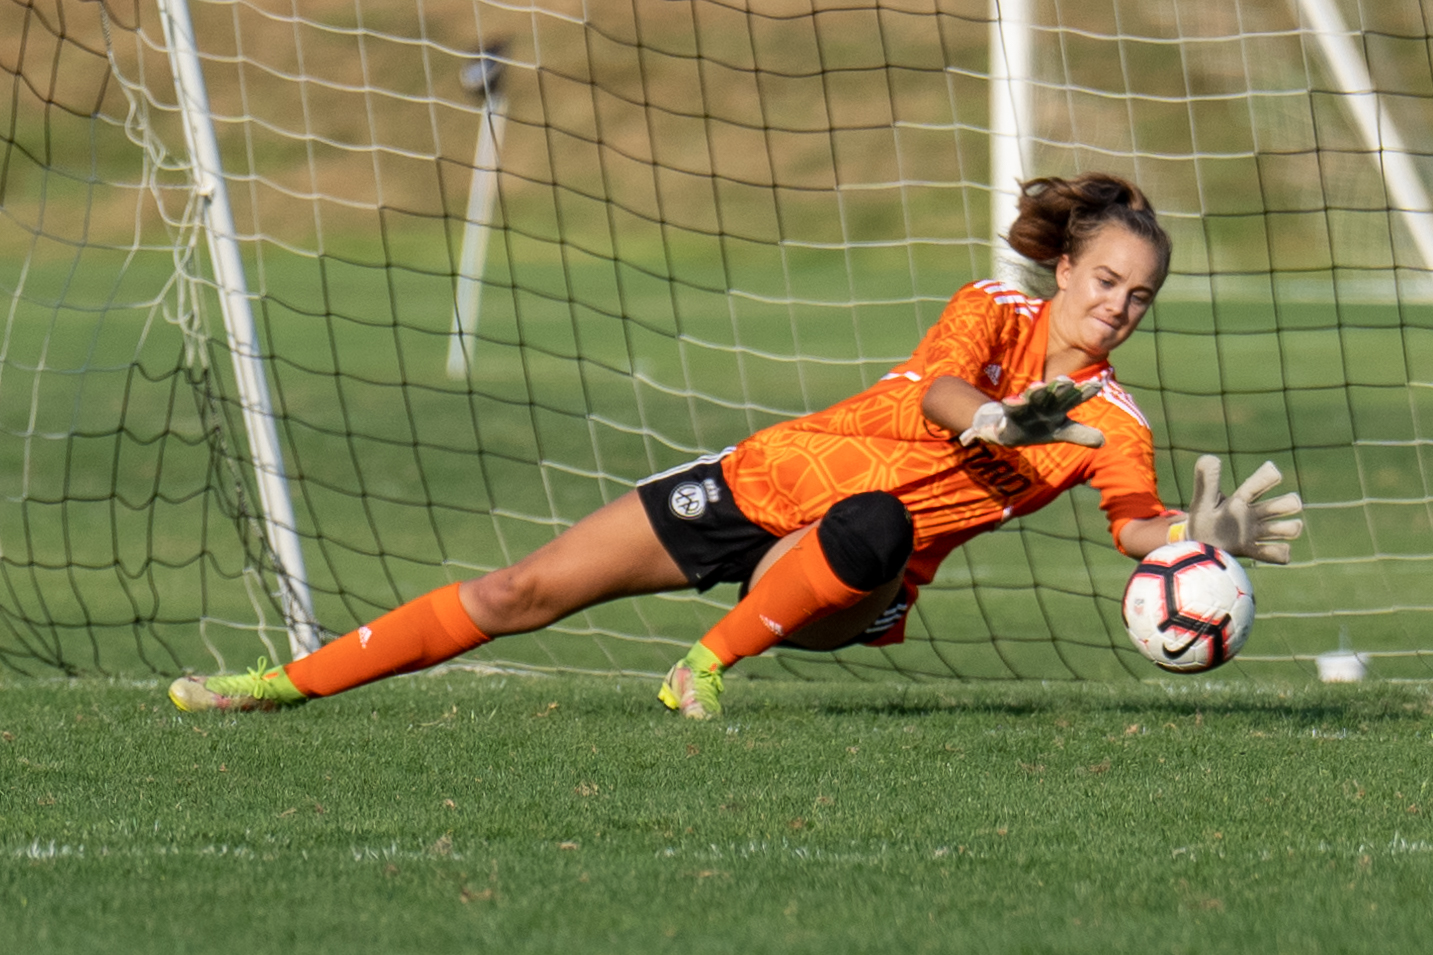 Female goalkeeper wearing an orange jersey, black shorts and orange socks, diving to save a soccer ball during a game.